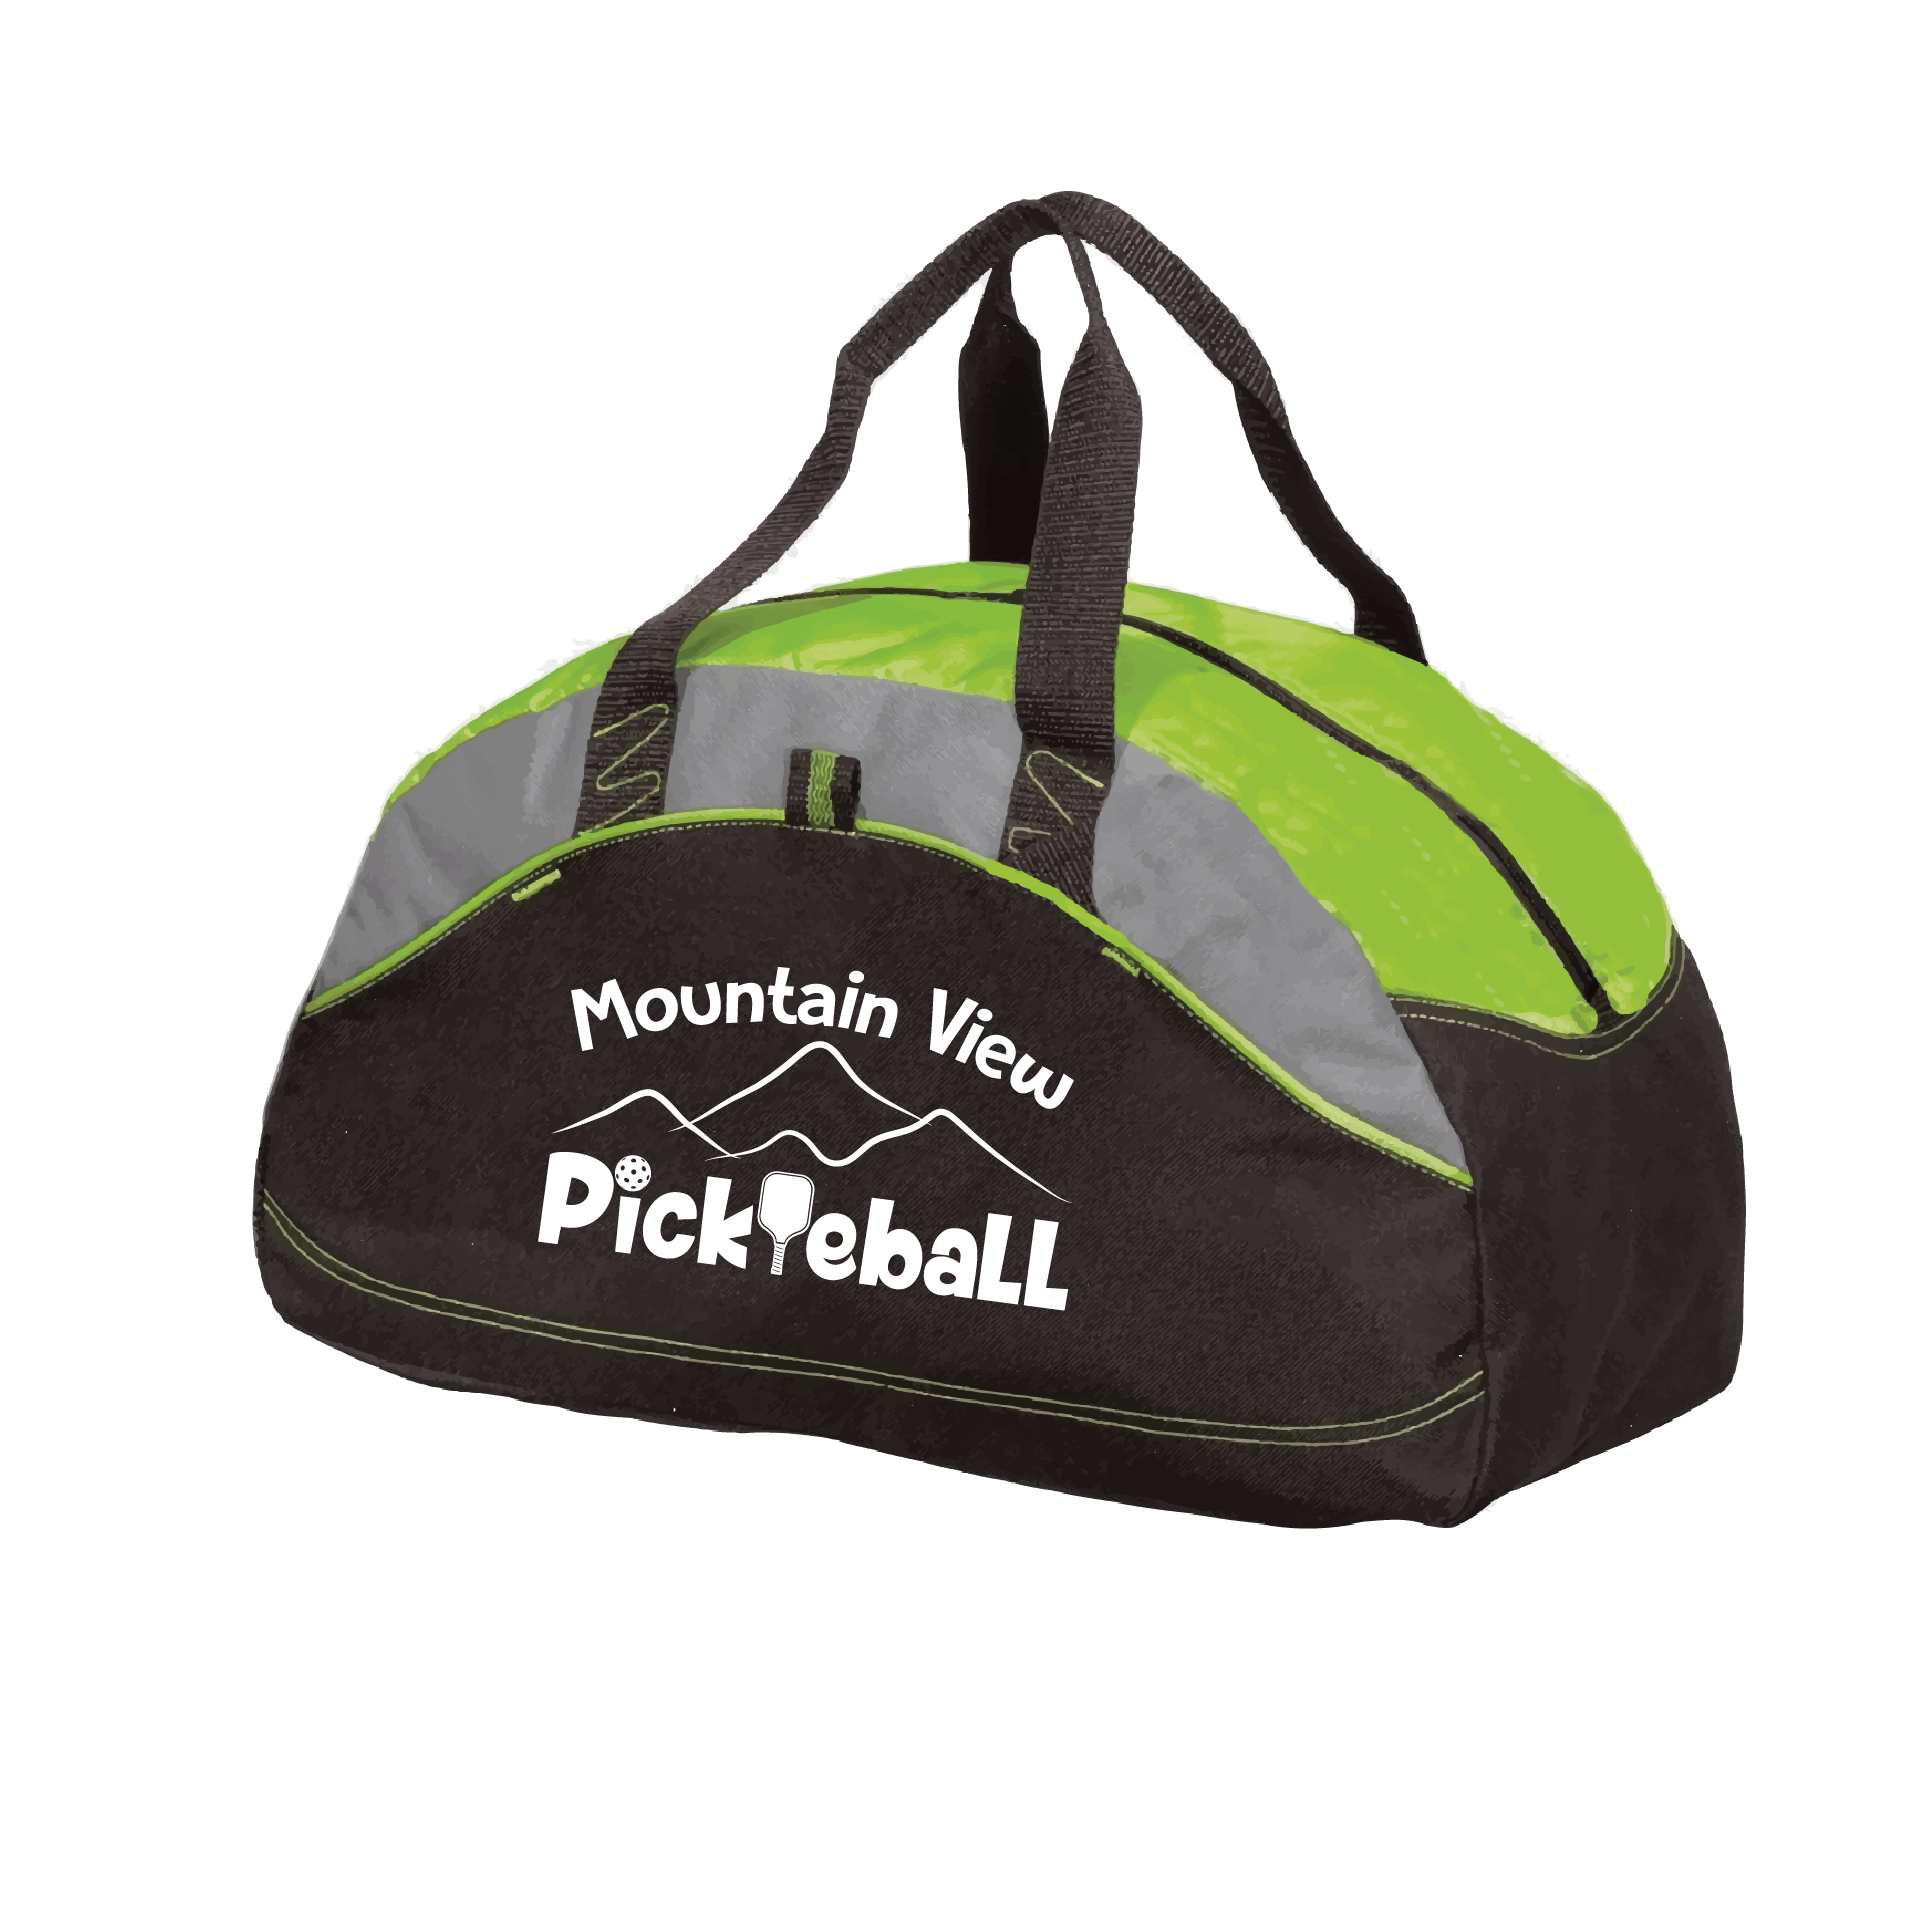 Pickleball Design: Mt. View Pickleball Club  Carry your gear in comfort and style. This fun pickleball duffel bag is the perfect accessory for all pickleball players needing to keep their gear in one place. This medium sized duffel tote is ideal for all your pickleball activities. The large center compartment allows for plenty of space and the mesh end pocket is perfect for holding a water bottle. Duffel bag comes with an adjustable shoulder strap and the polyester material is durable and easily cleaned.